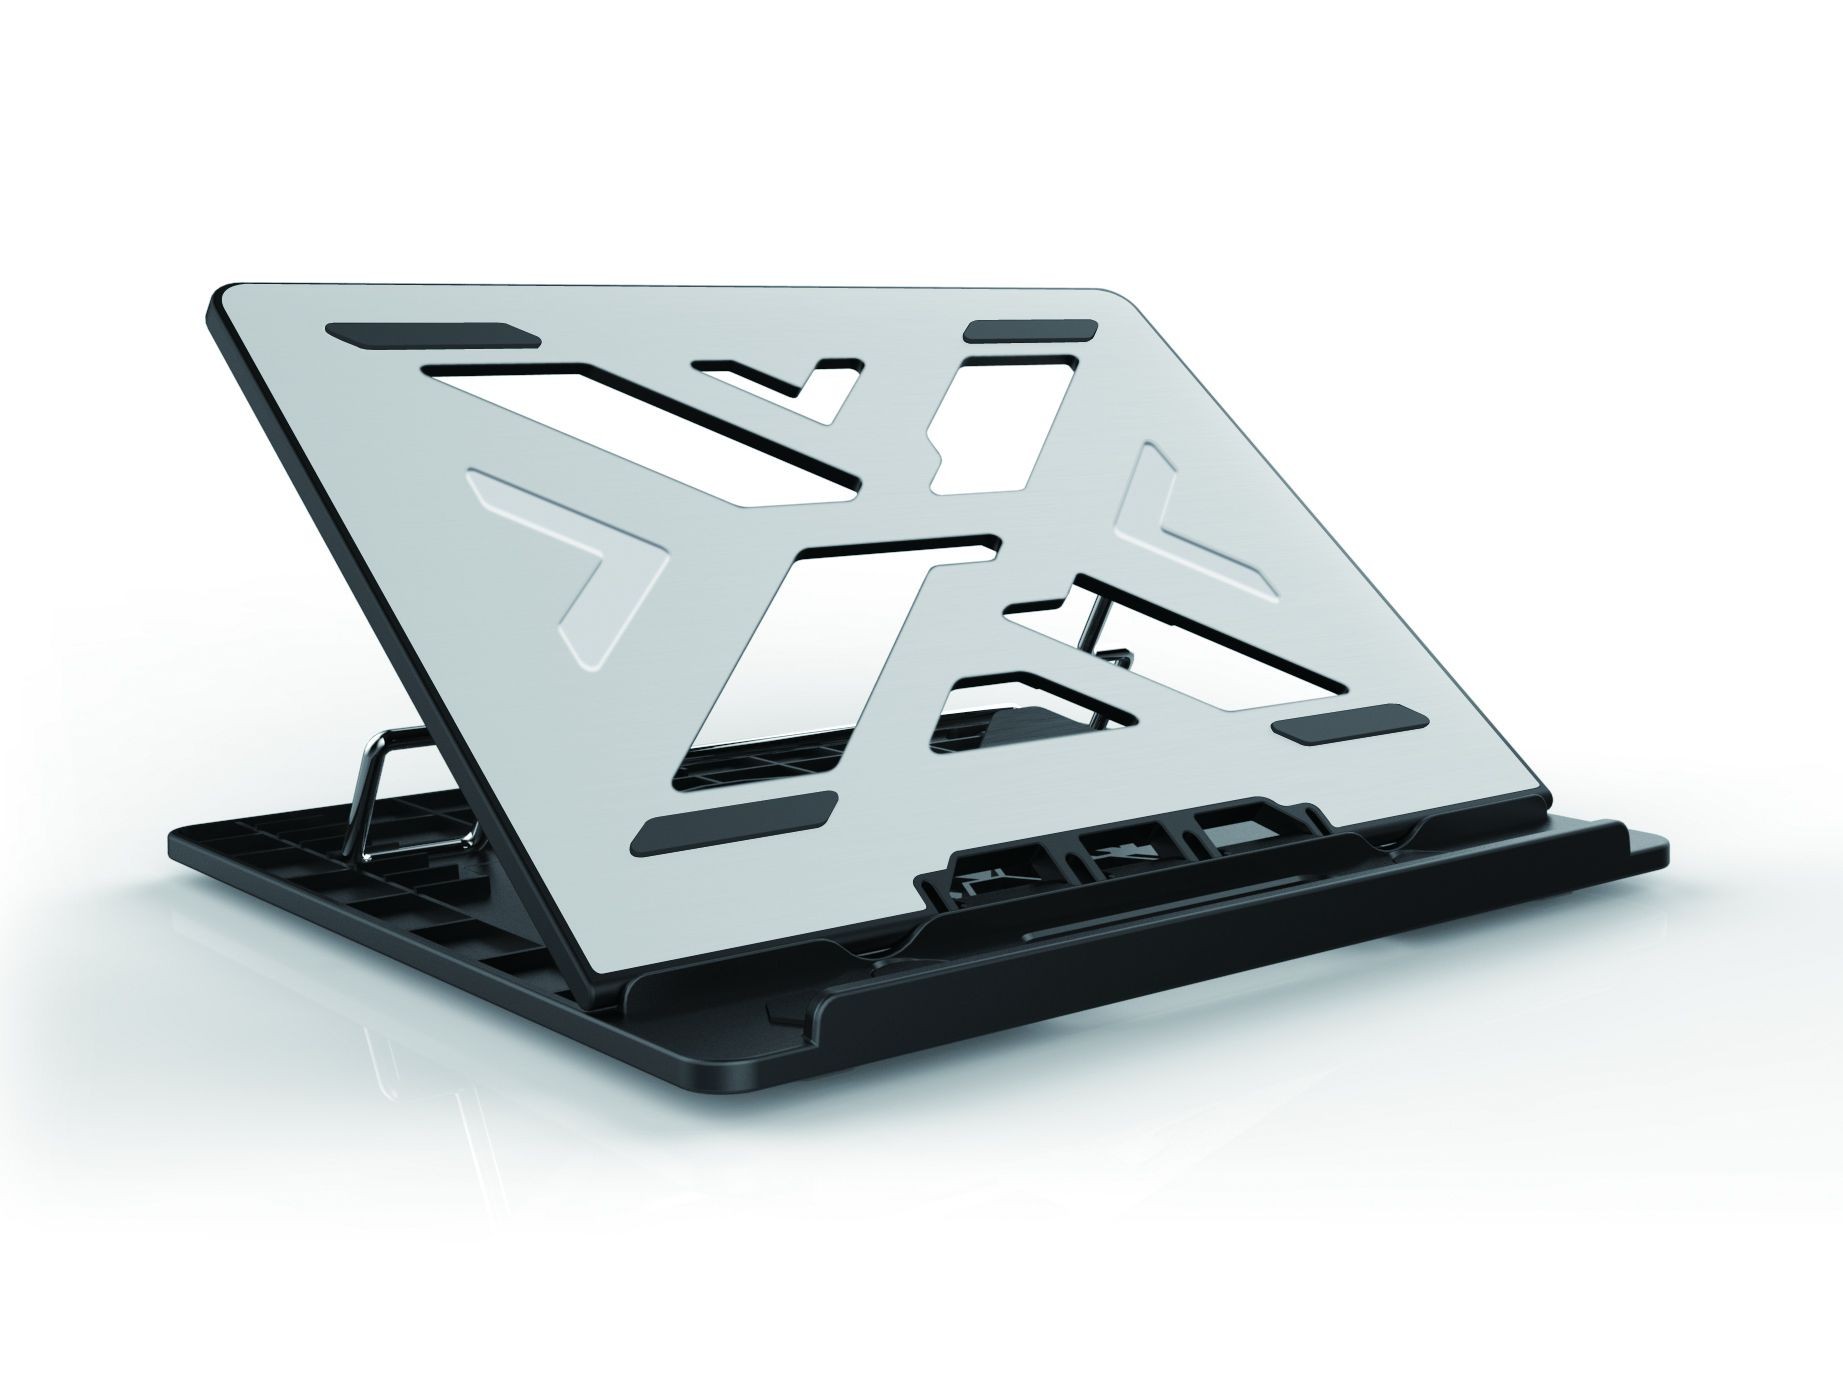 Conceptronic ERGO Laptop Cooling Stand - THANA03G